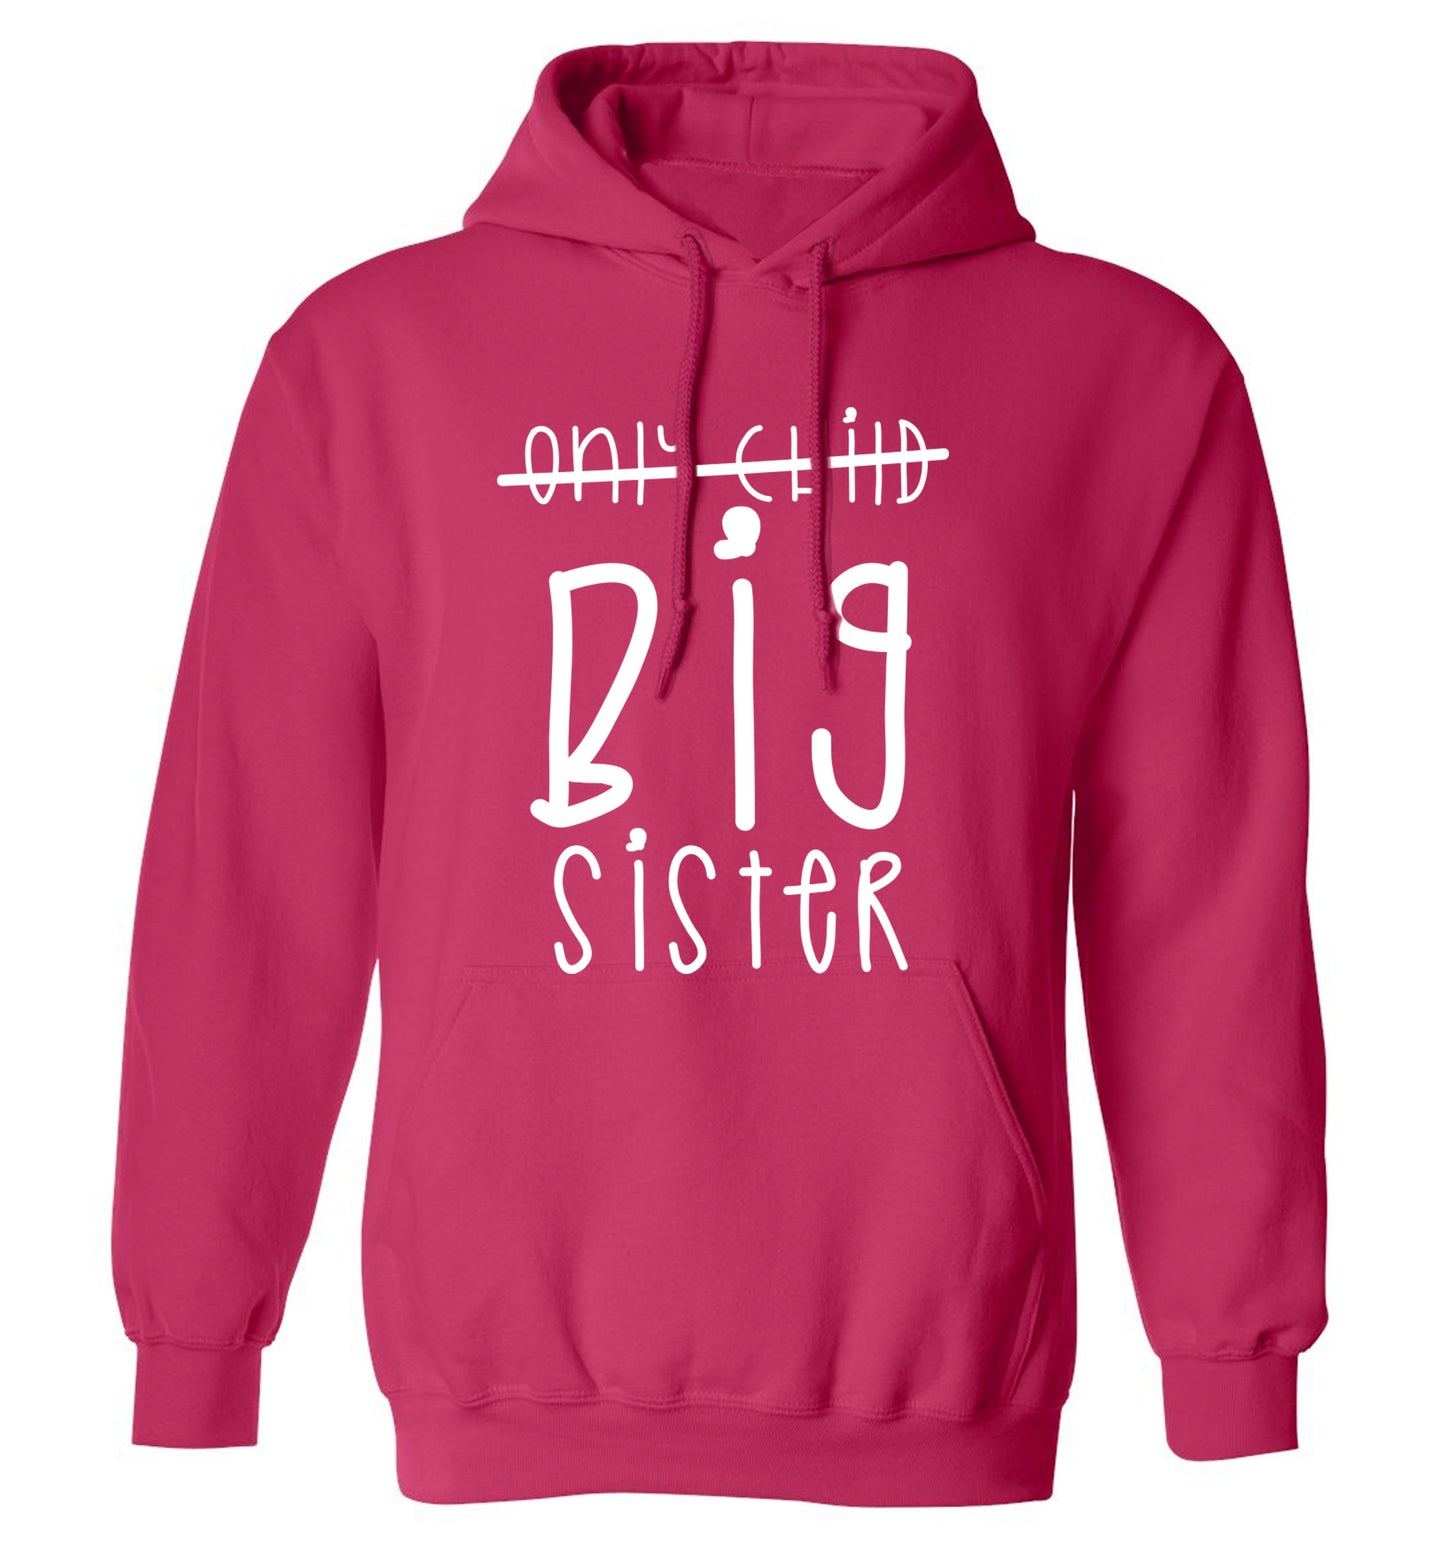 Only child big sister adults unisex pink hoodie 2XL